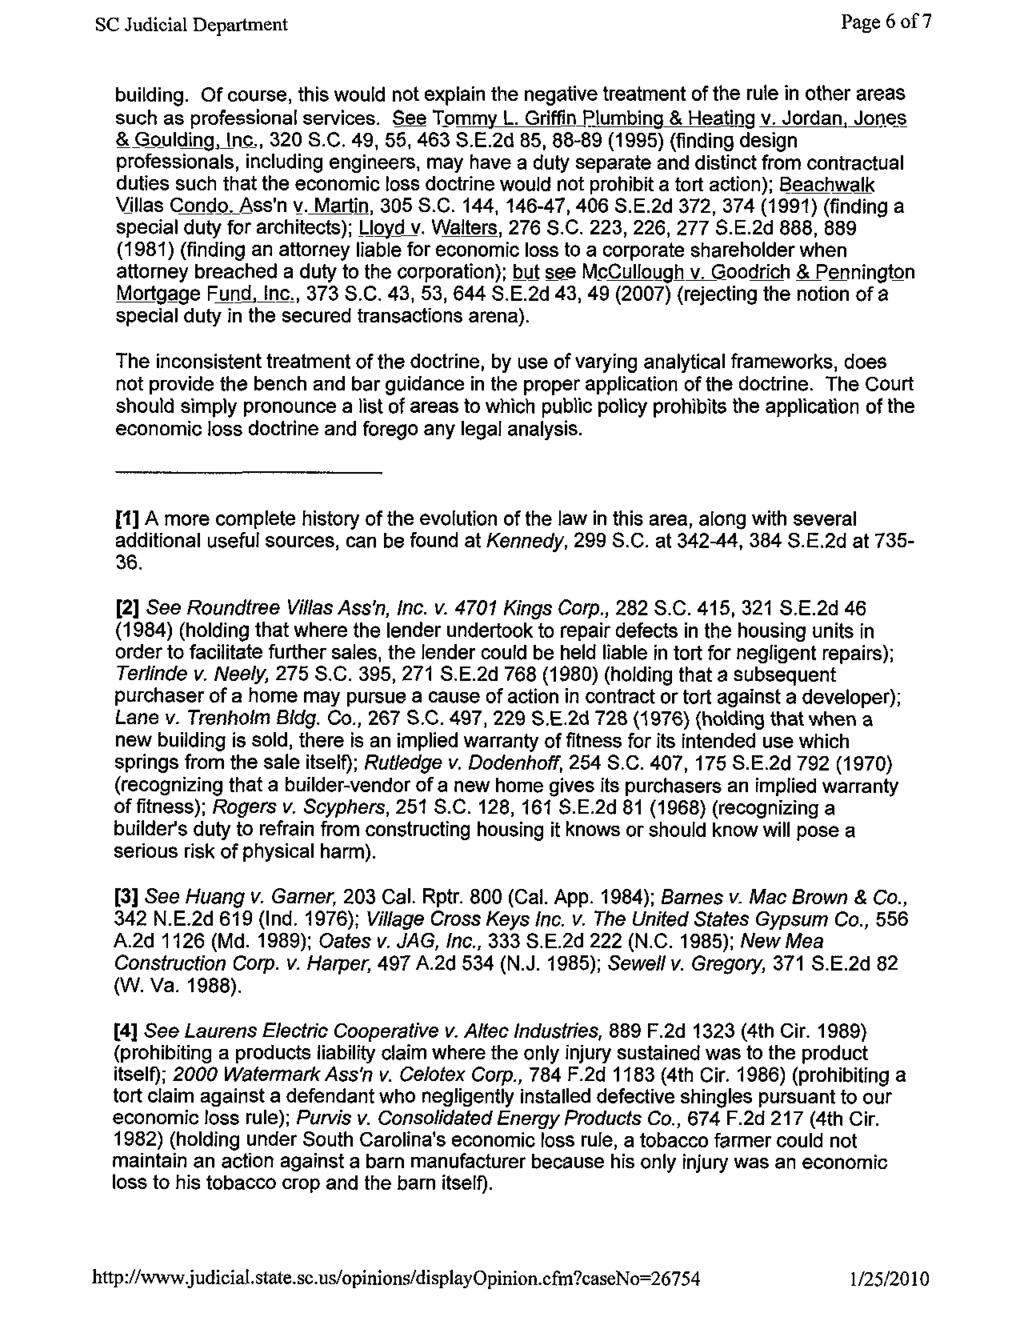 SC Judicial Department Page 6 of 7 building. Of course, this would not explain the negative treatment of the rule in other areas such as professional services. See Tommy L.